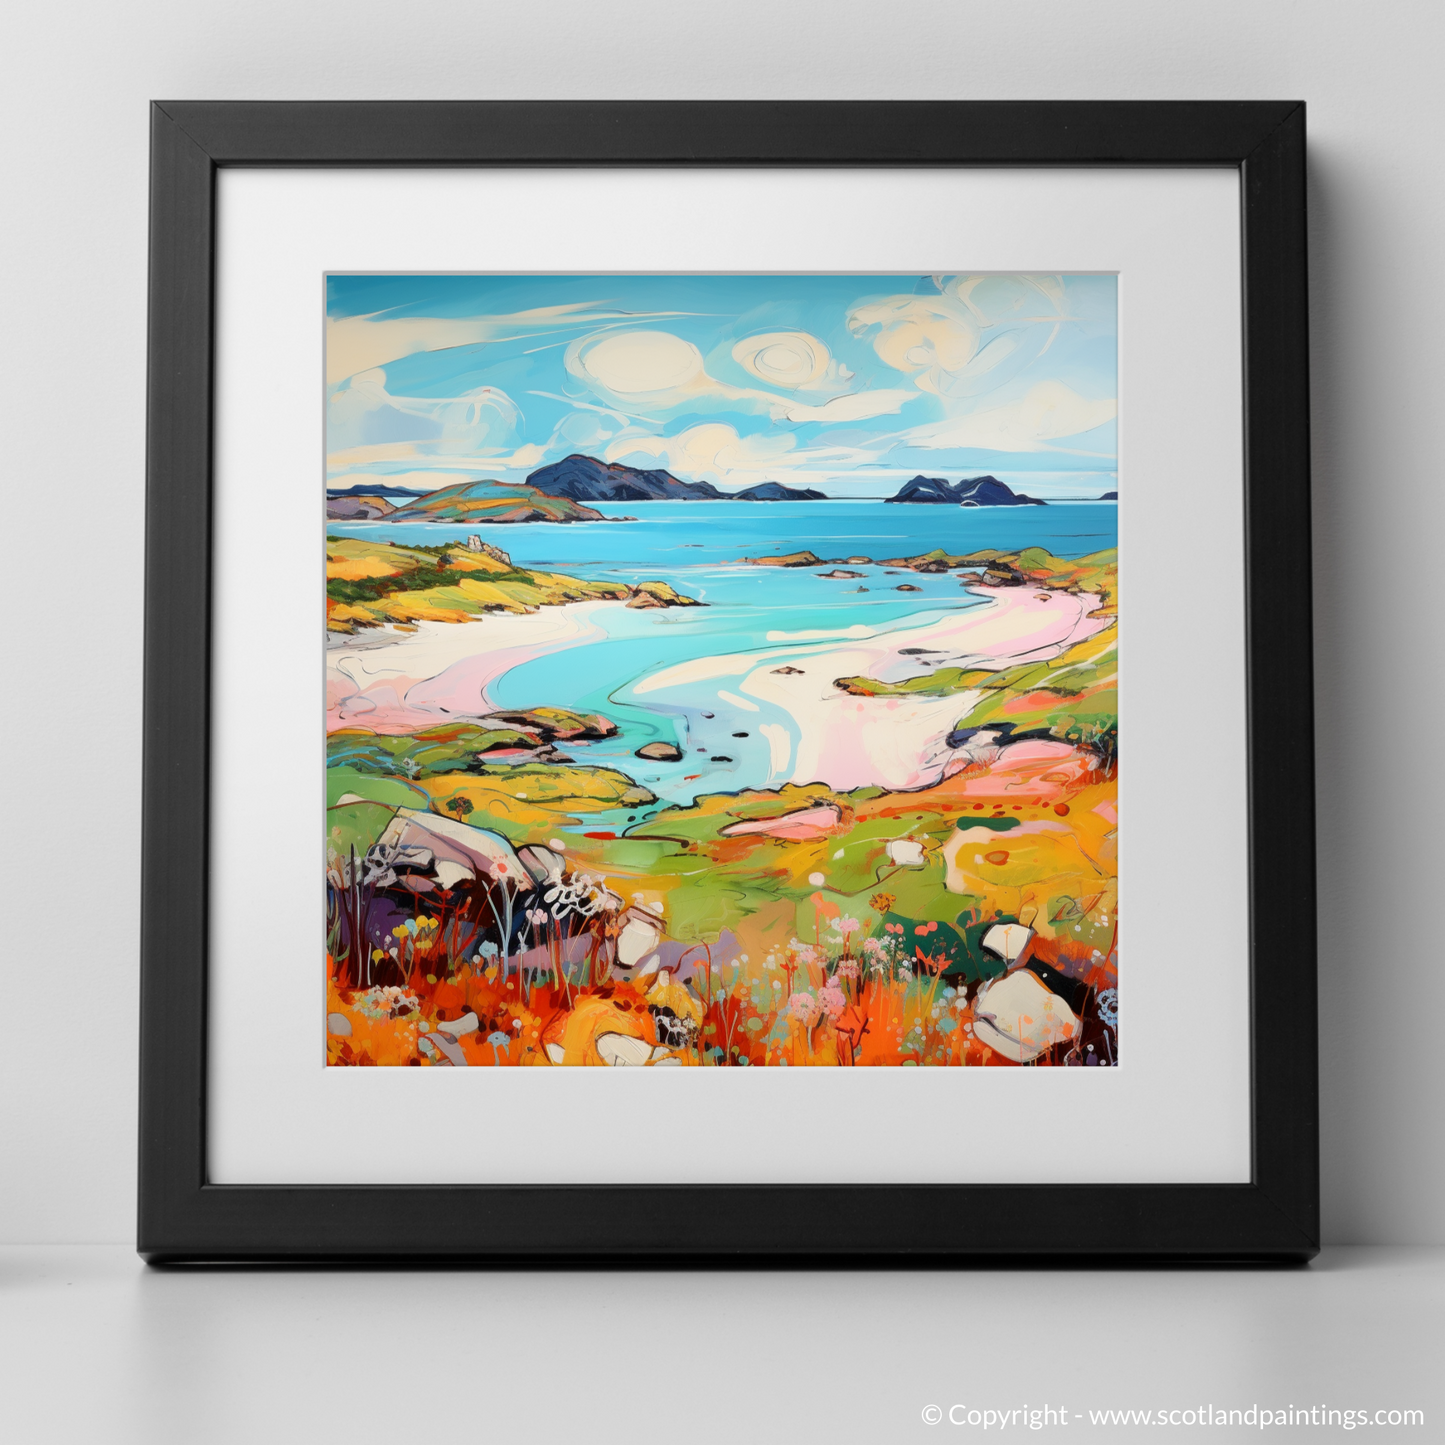 Art Print of Kiloran Bay, Isle of Colonsay in summer with a black frame